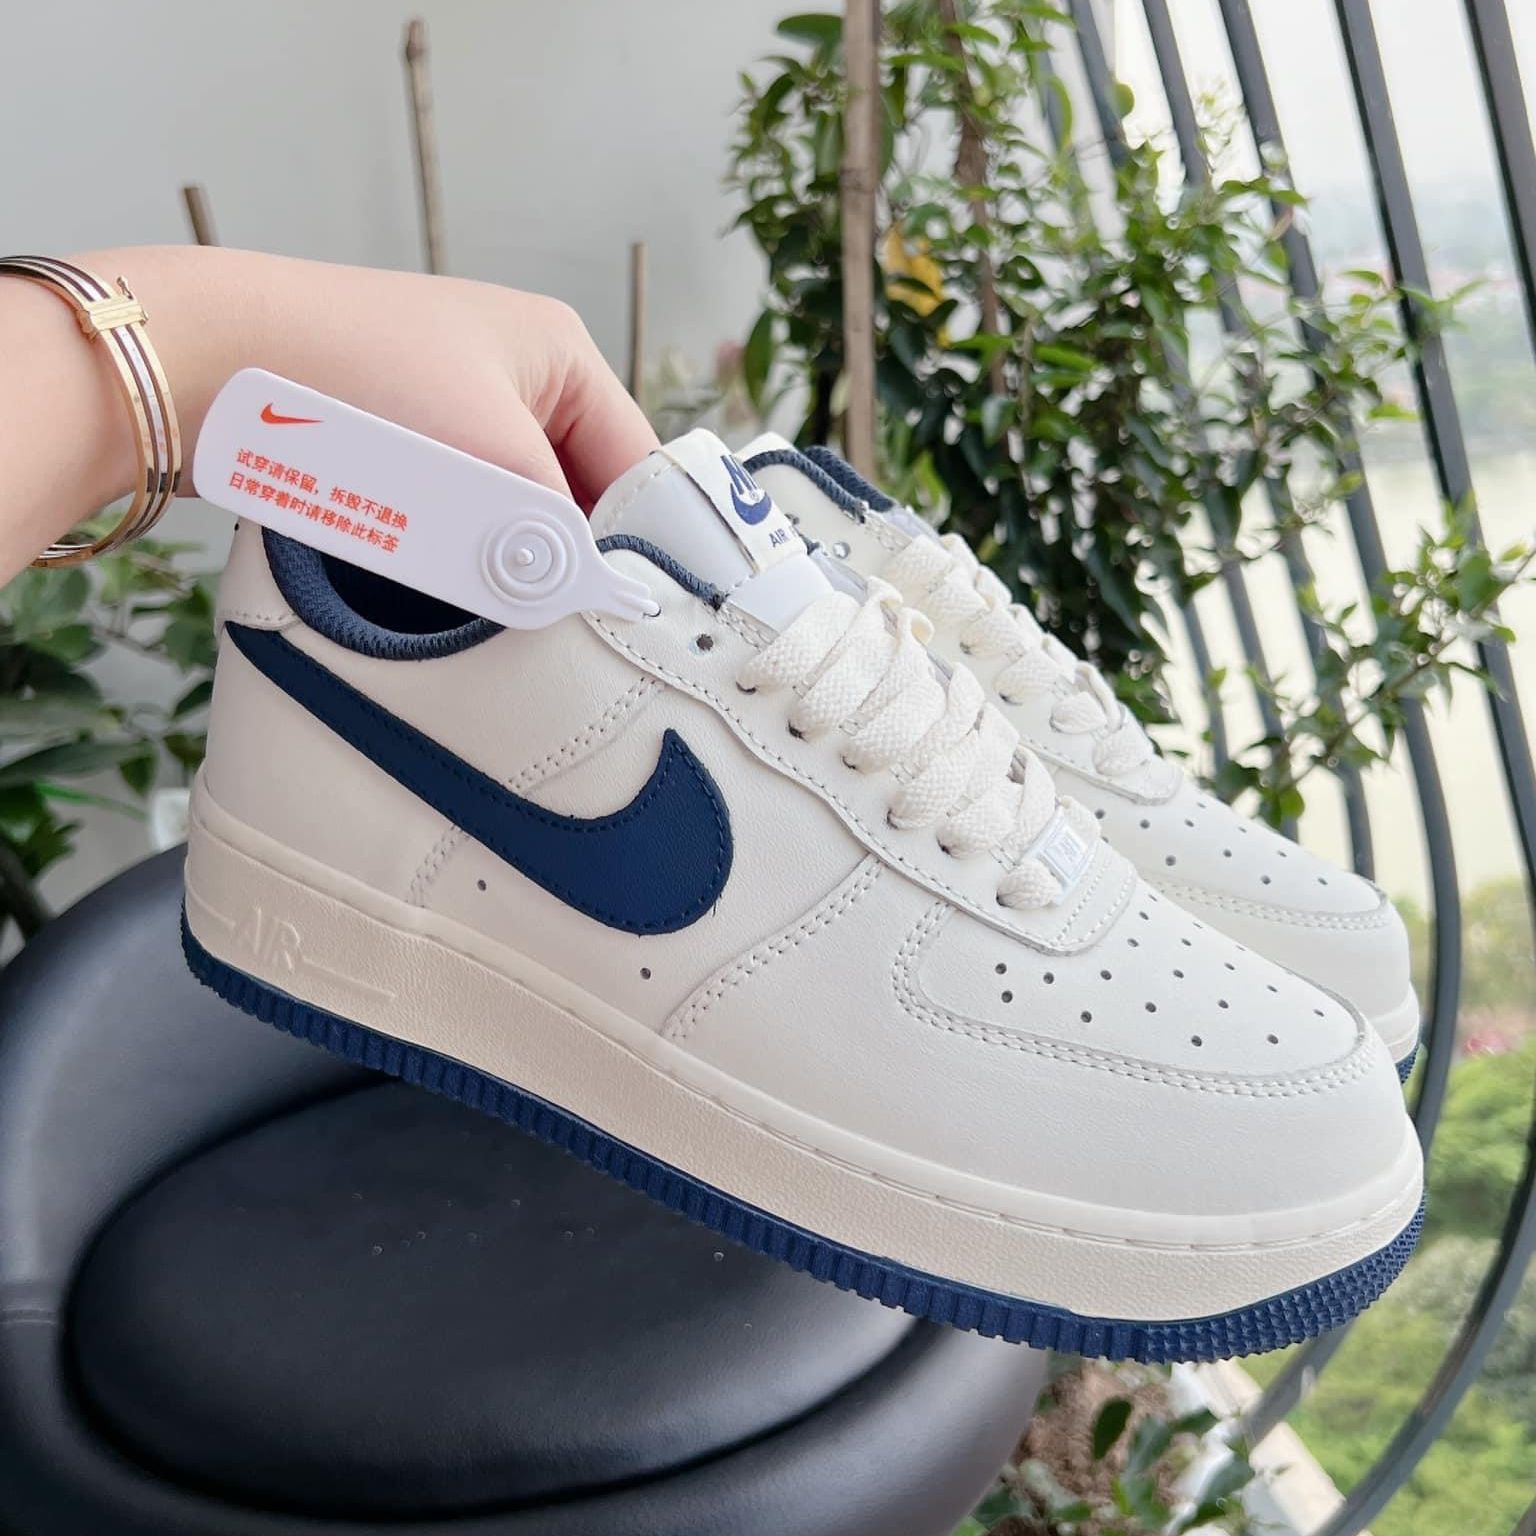 giày Nike Air Force 1 Low 07 Cream White Navy Skate